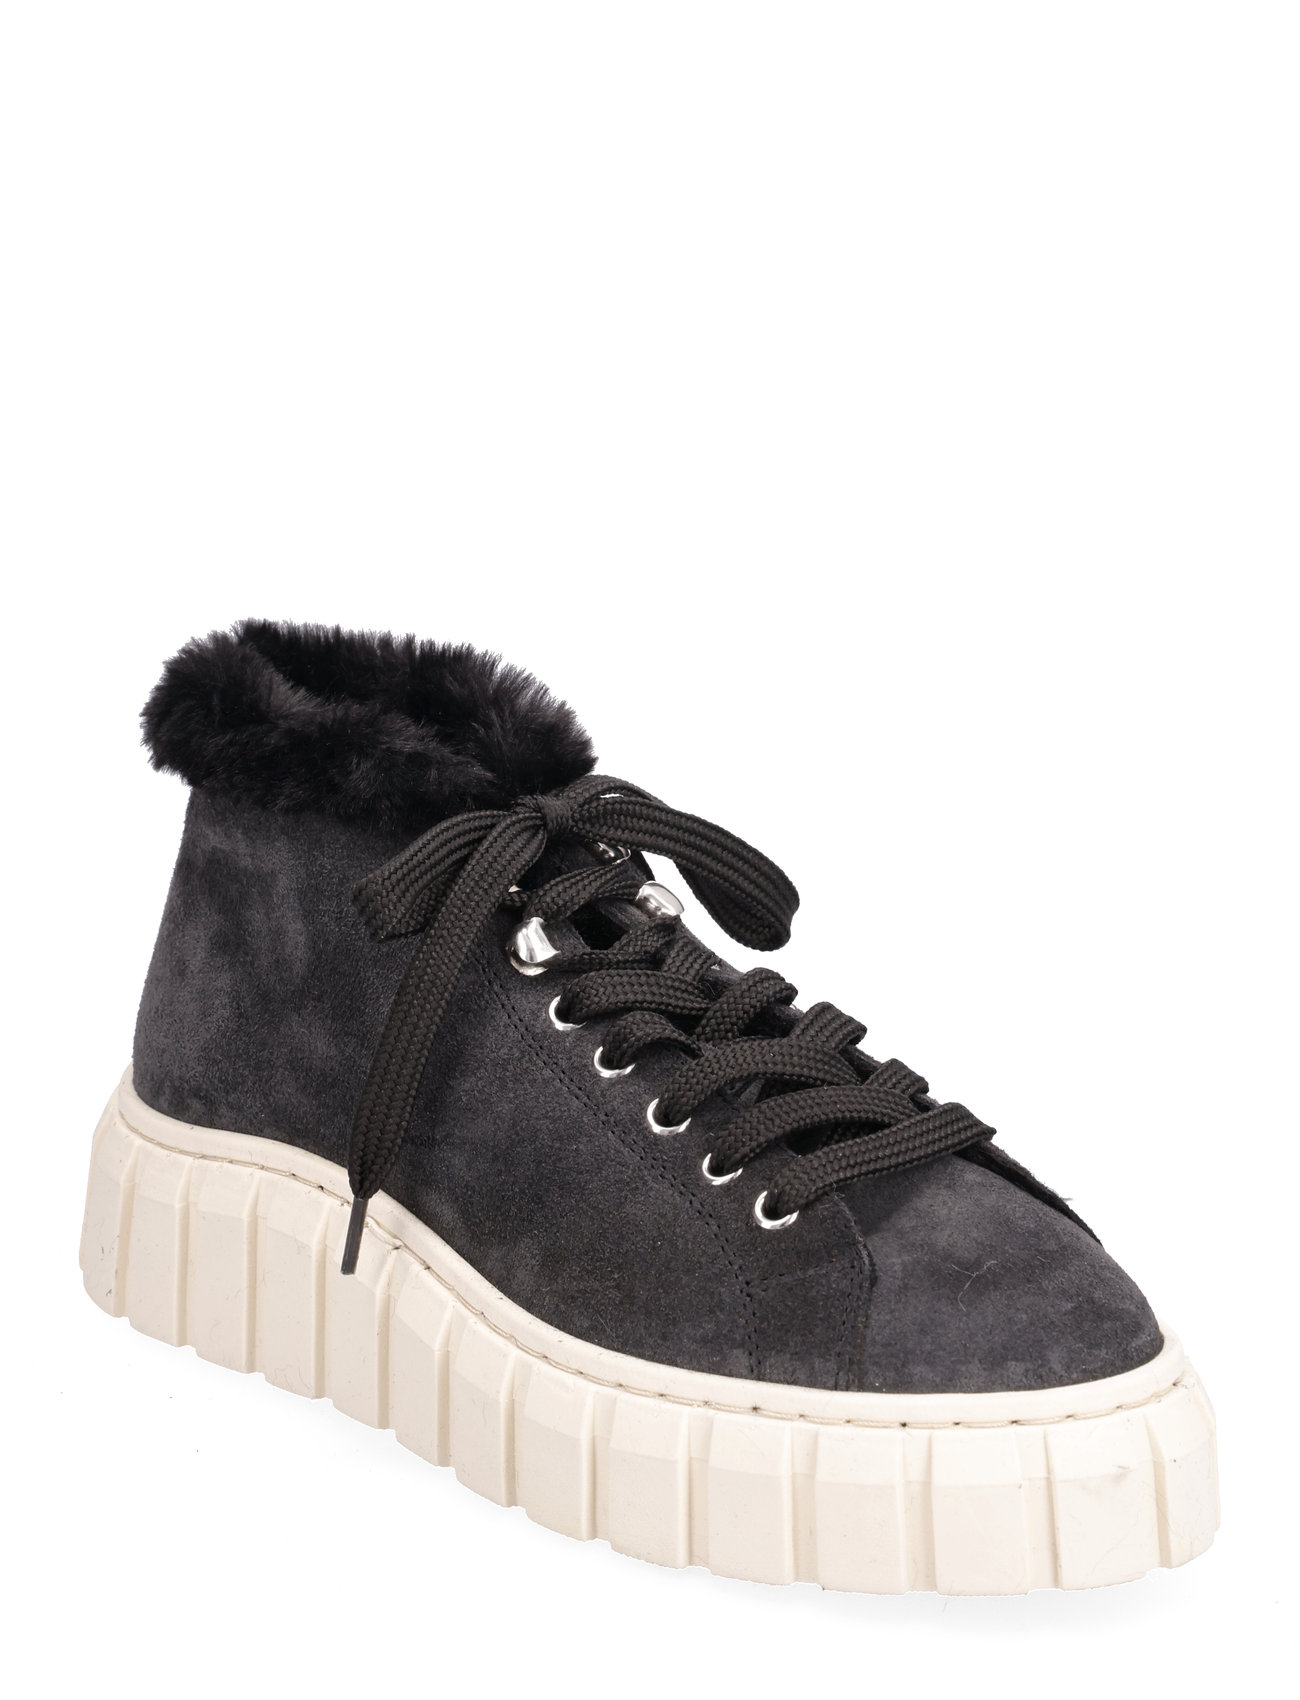 Balo Sneaker Boot - Black Suede Shoes Sneakers Chunky Sneakers Black Garment Project